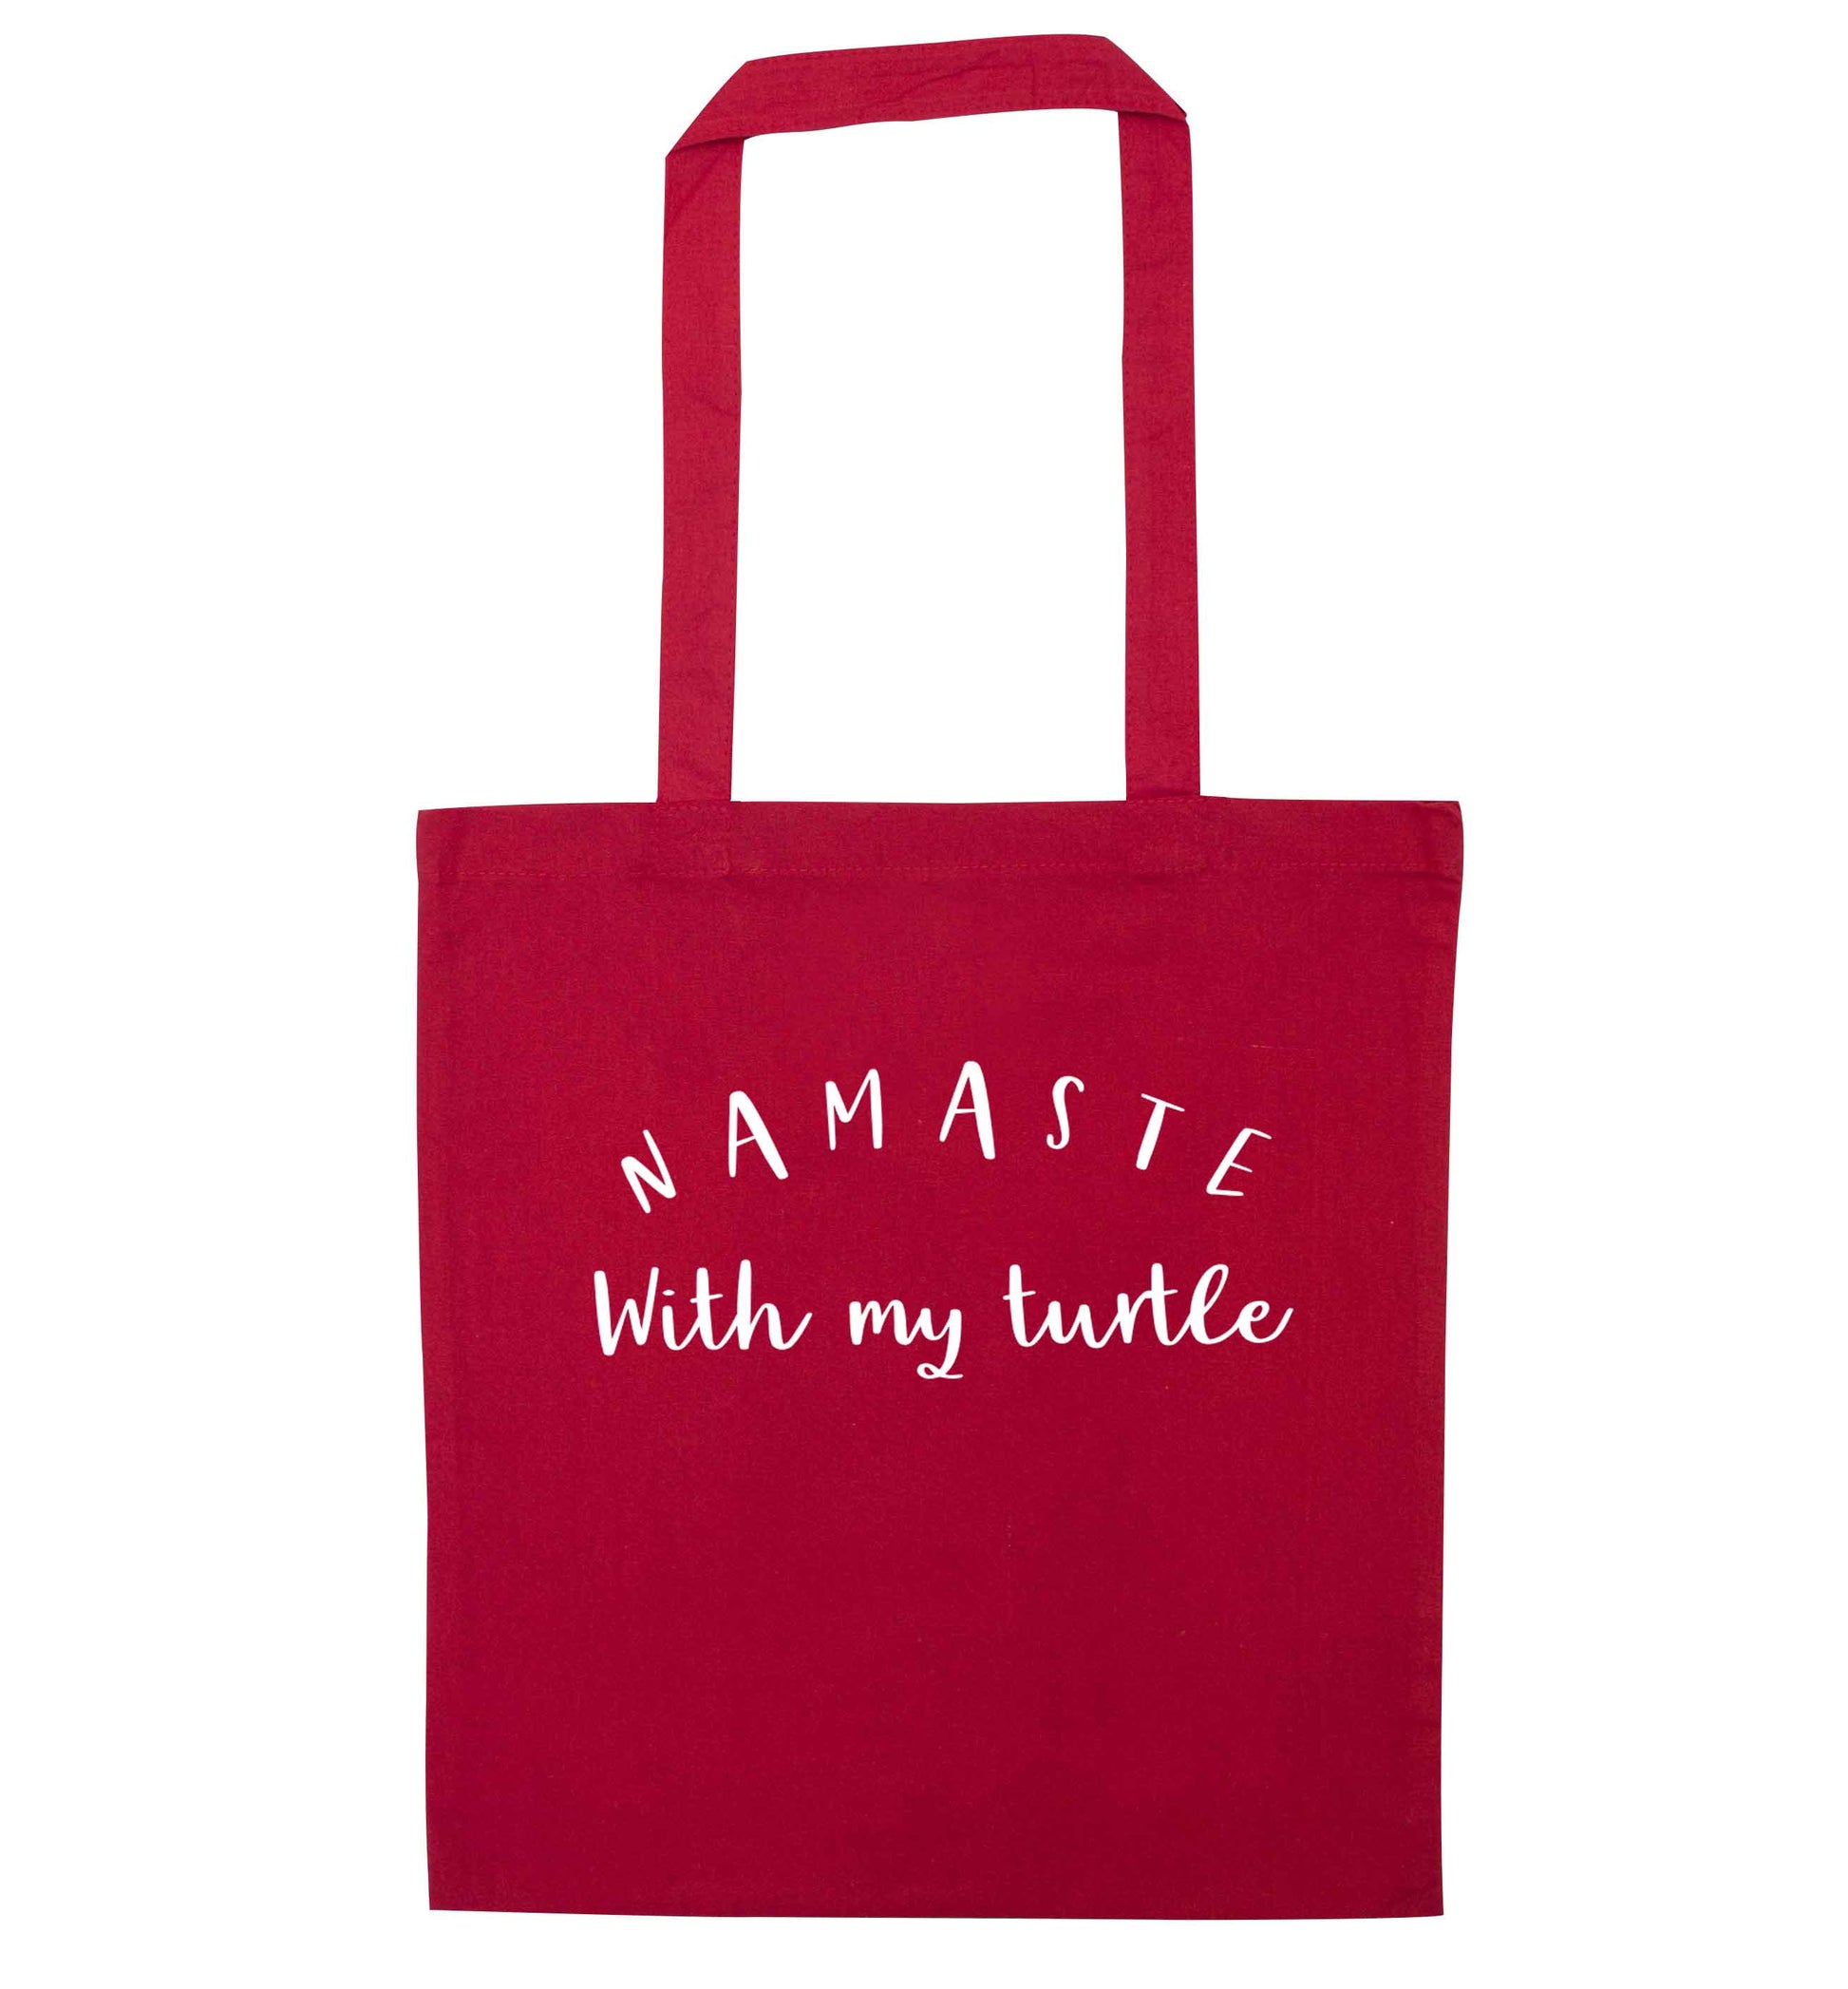 Namaste with my turtle red tote bag